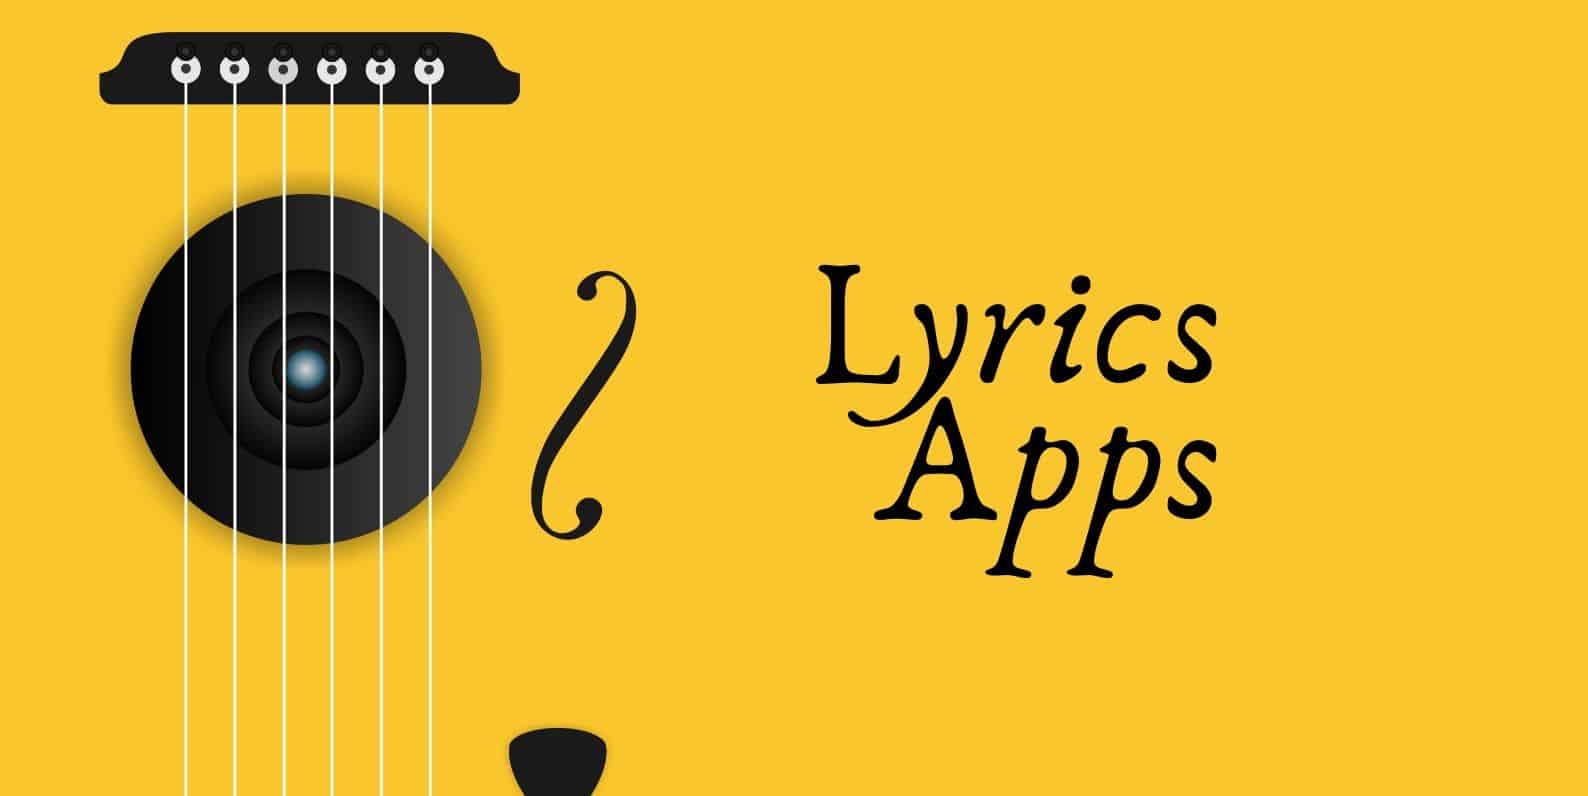 best lyrics apps to download for android and iPhone